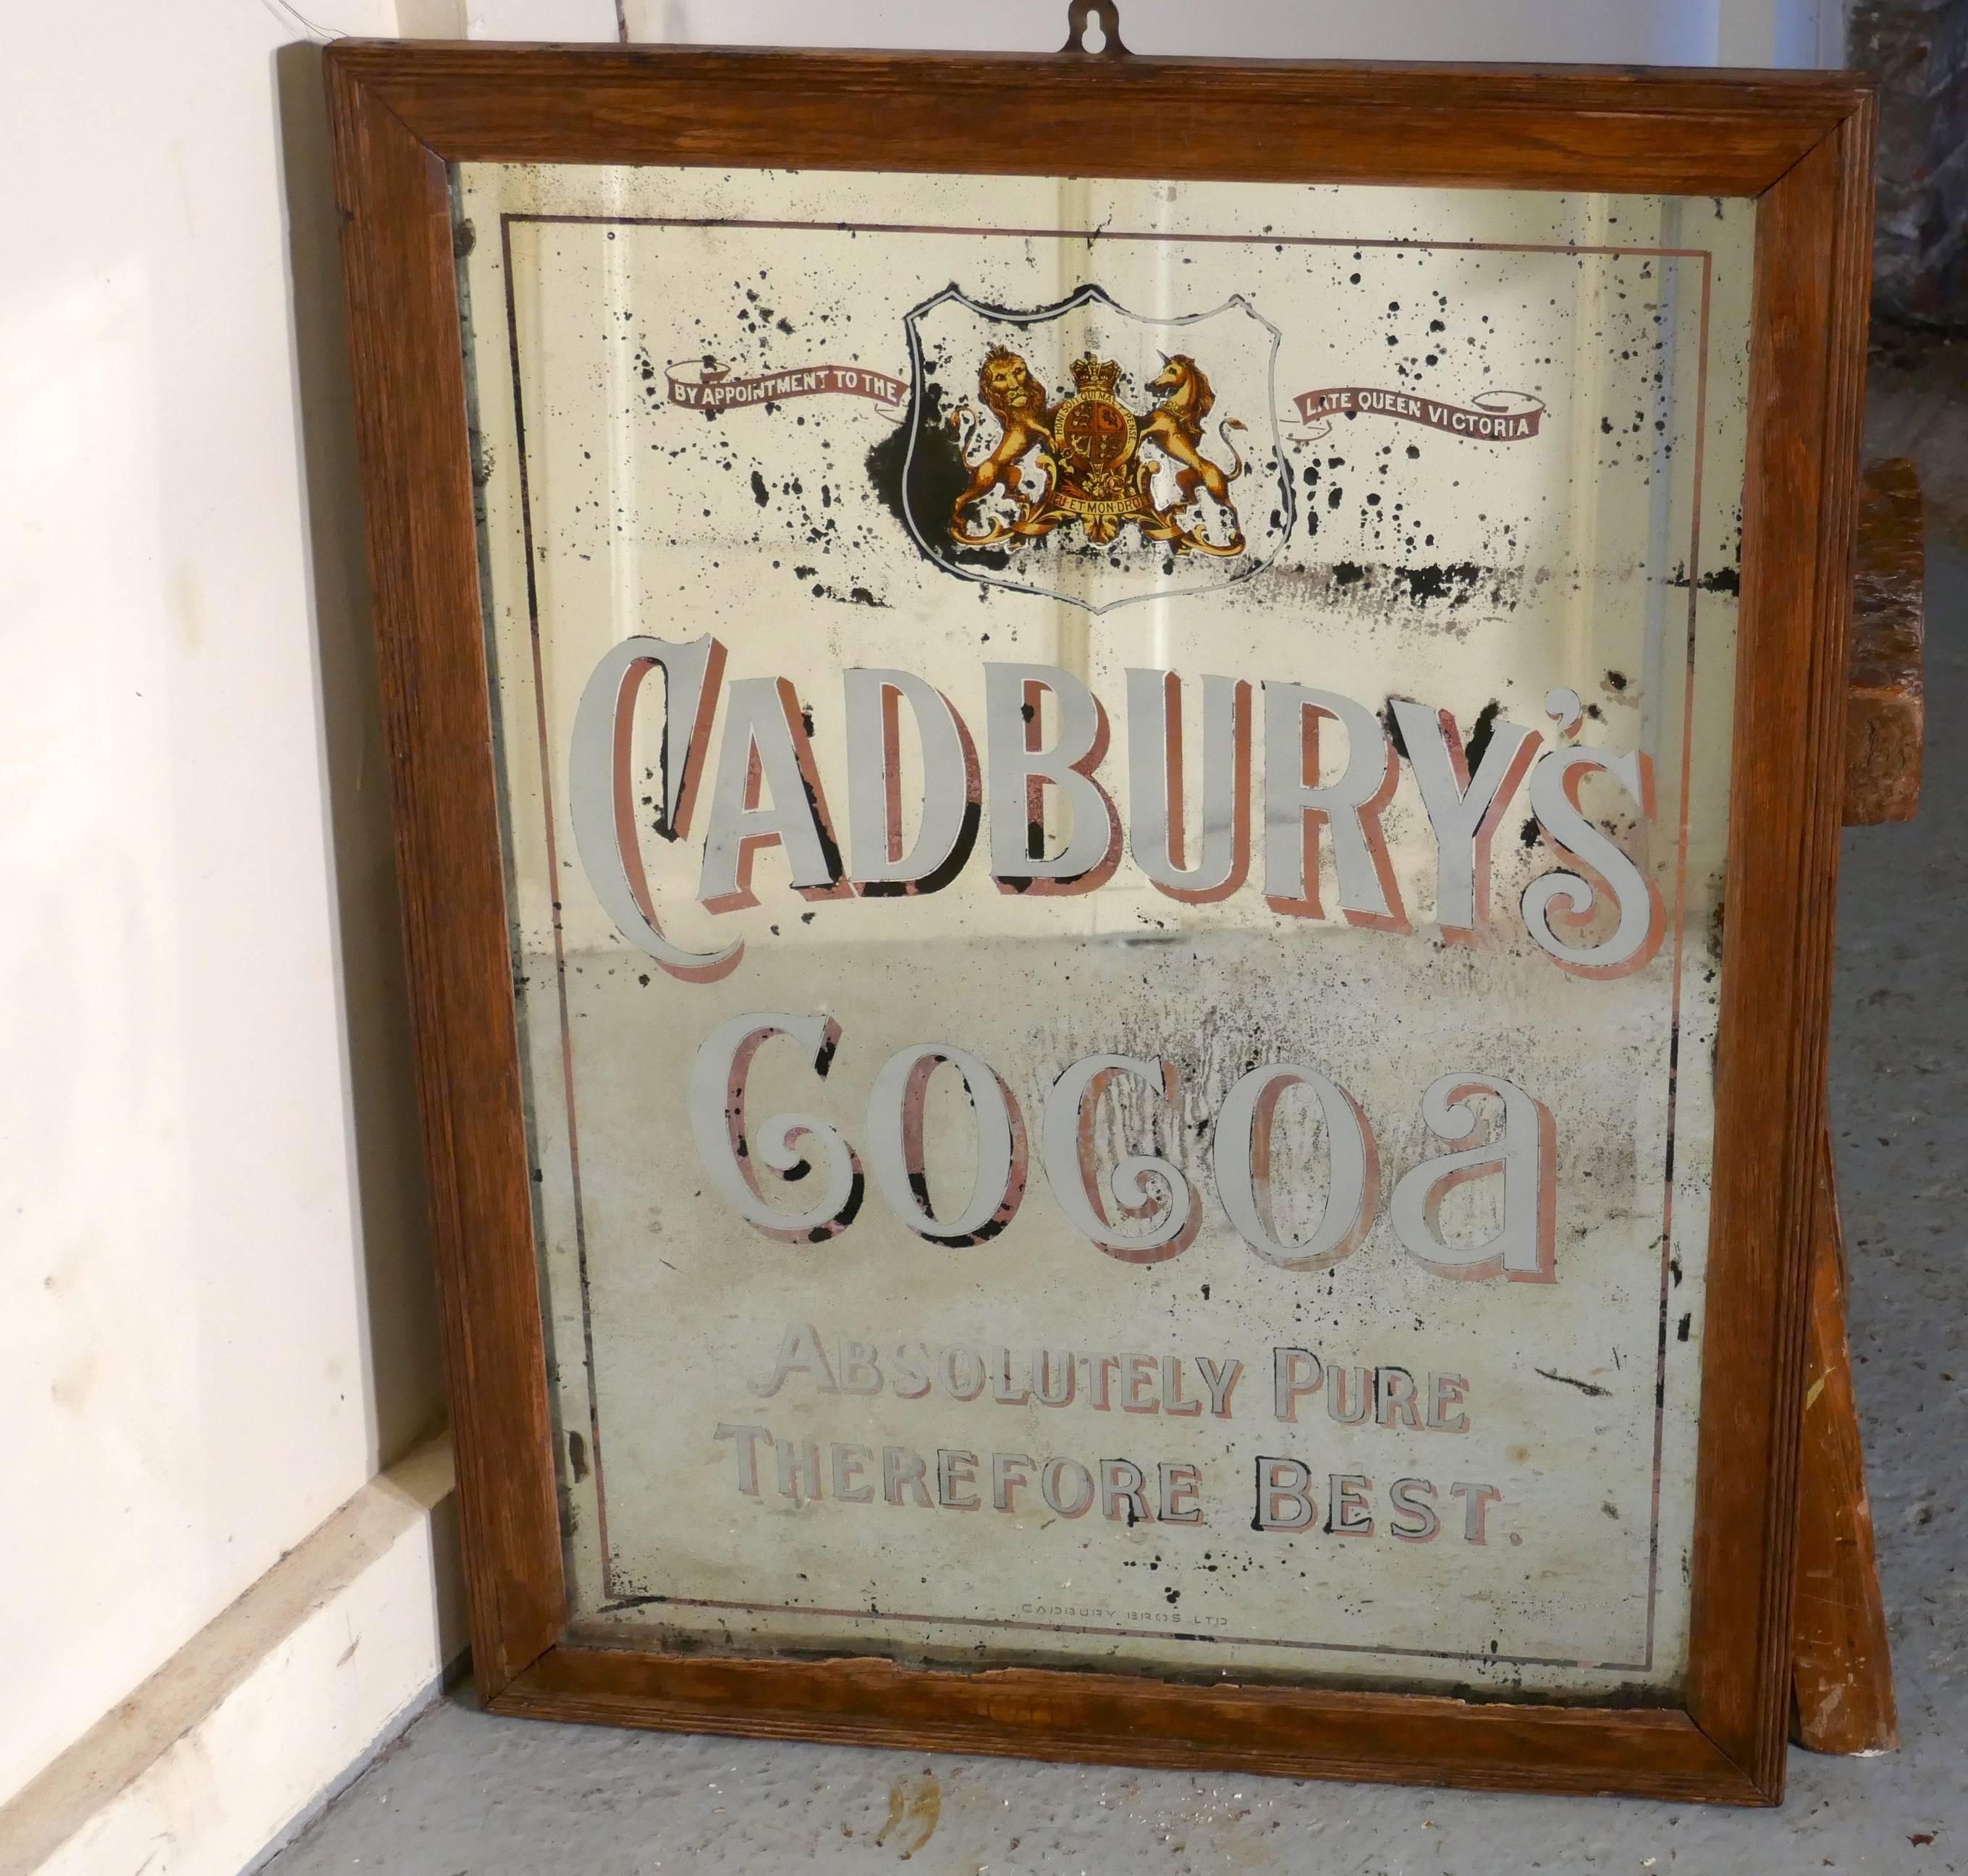 Large Cadbury’s Cocoa Advertising Mirror, Royal Appointment to Queen Victoria 4